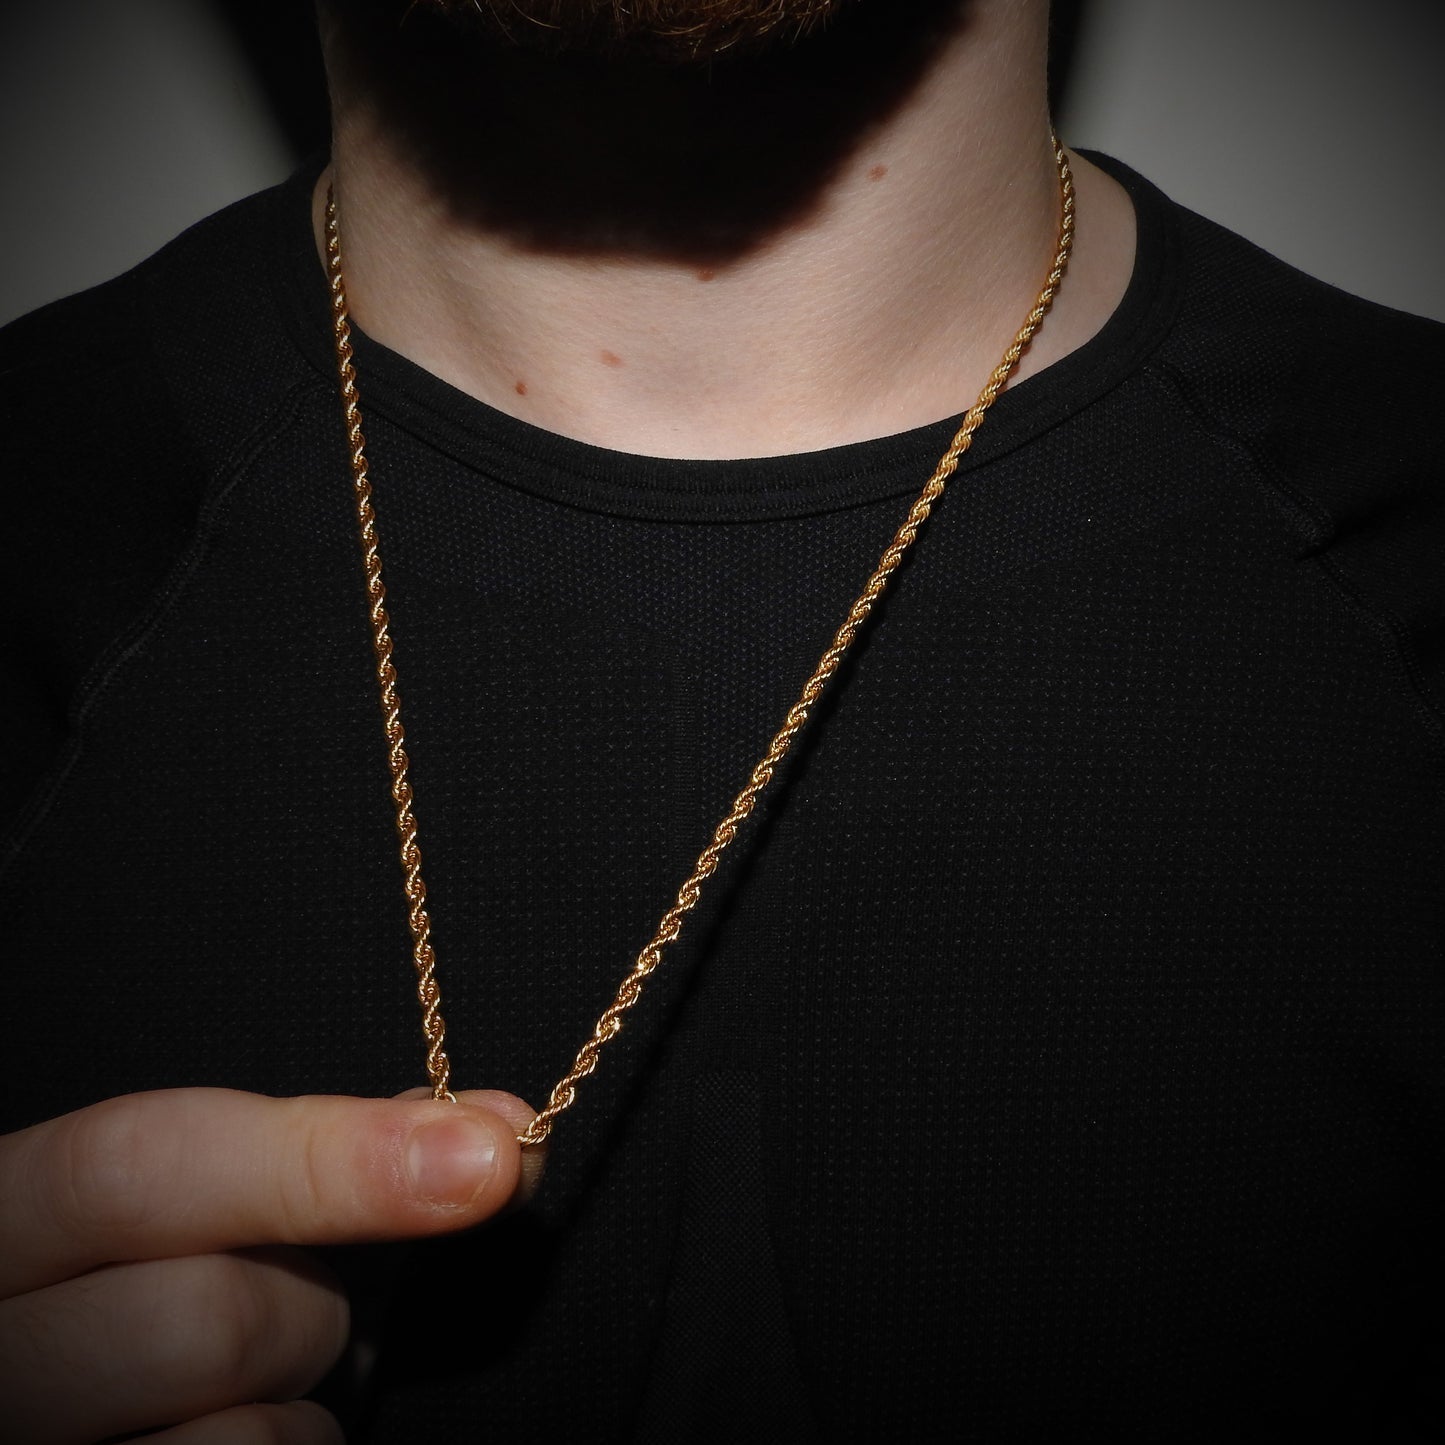 Rope chain + Pulsera 3mm - Gold Dealers